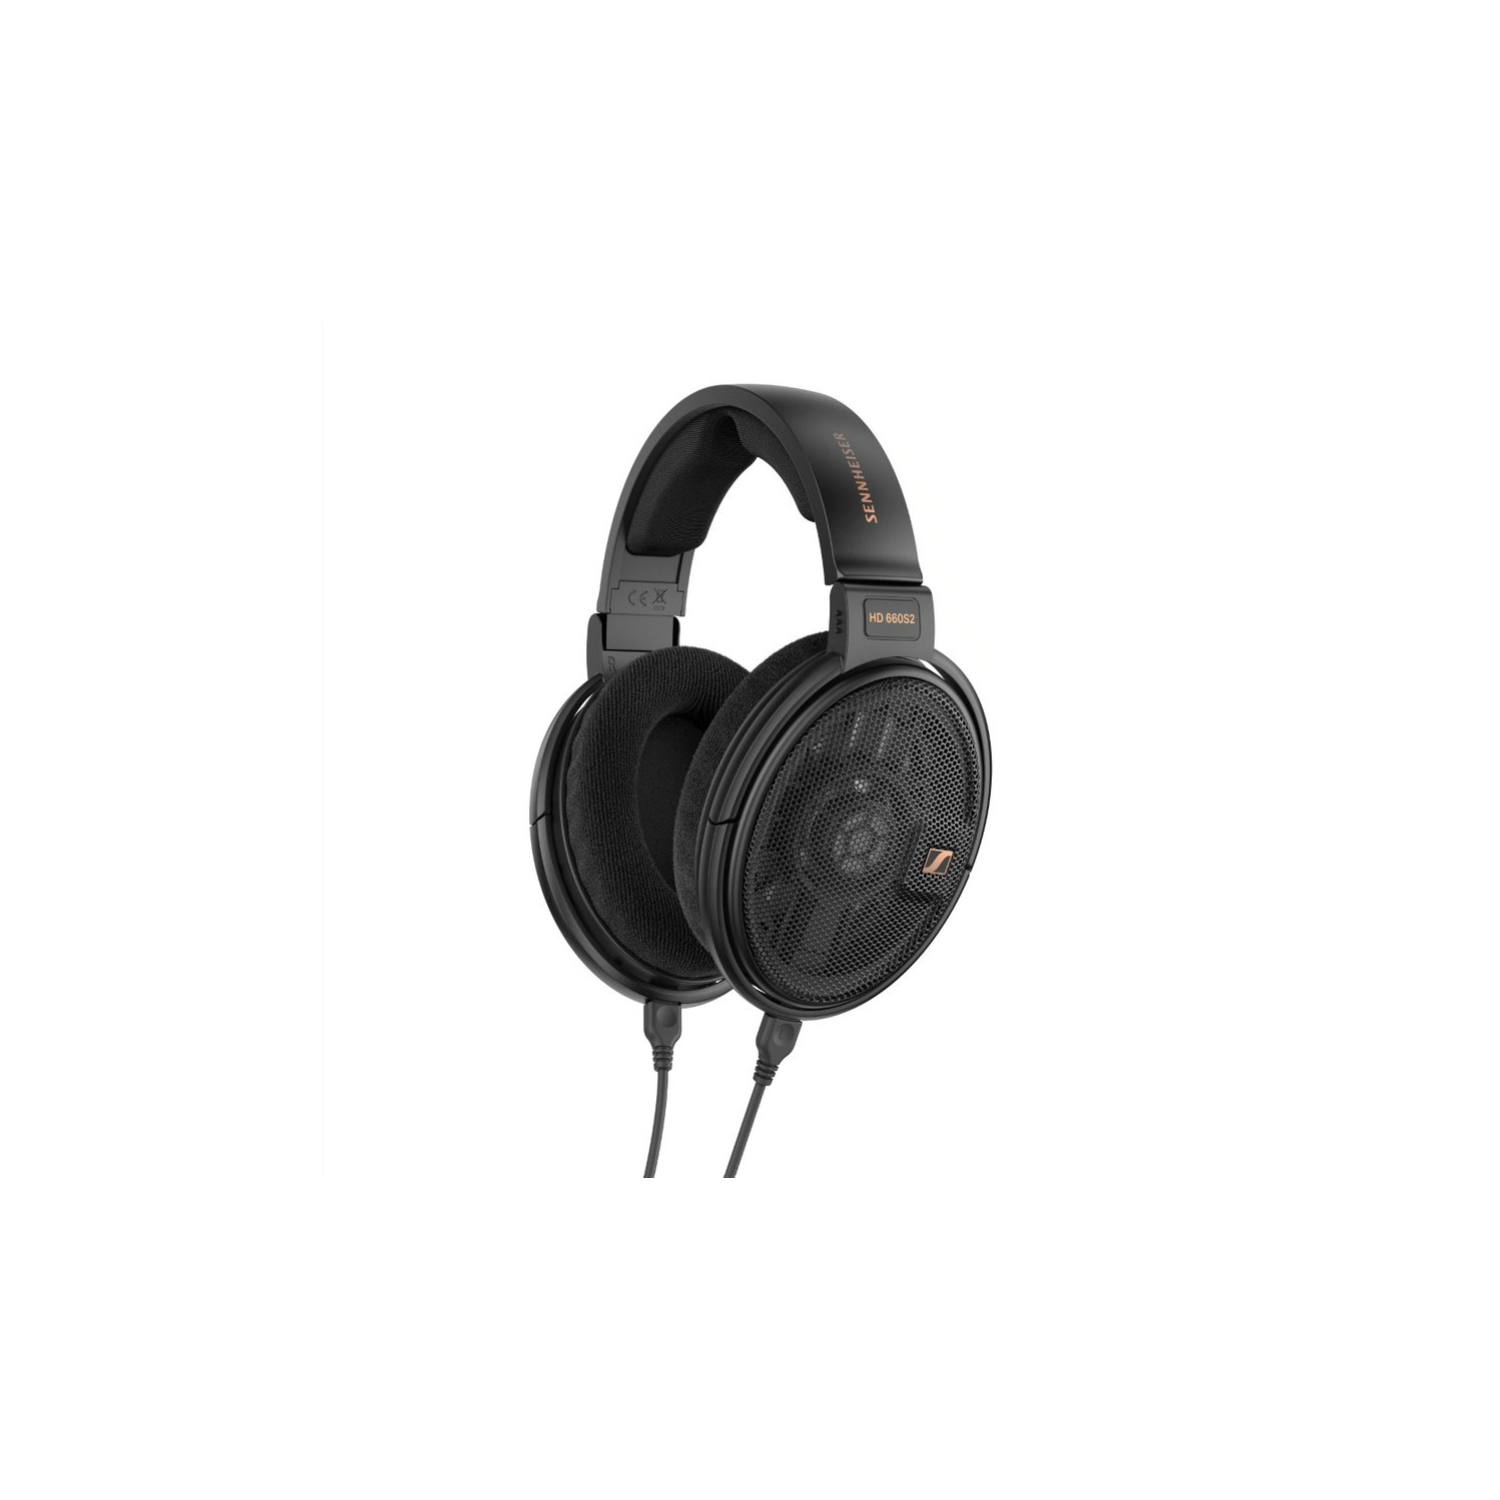 Sennheiser HD 660S 2 - Wired Audiophile Stereo Headphones with Deep Sub Bass, Optimized Surround, Transducer Airflow, Vented Magnet System and Voice Coil – Black